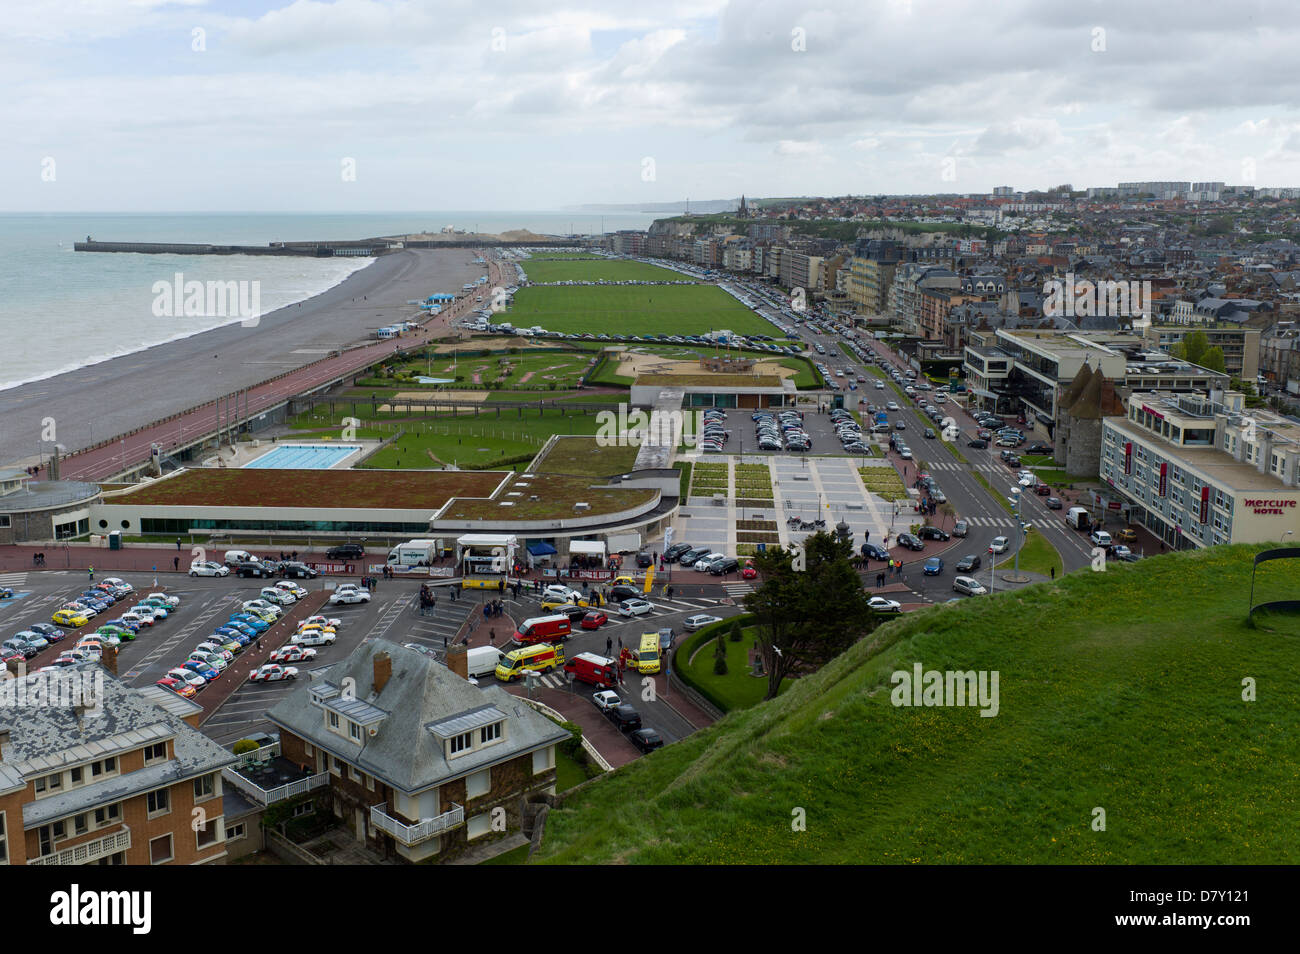 Beach, lawns and promenade from above, Dieppe, France, Normandy Stock Photo